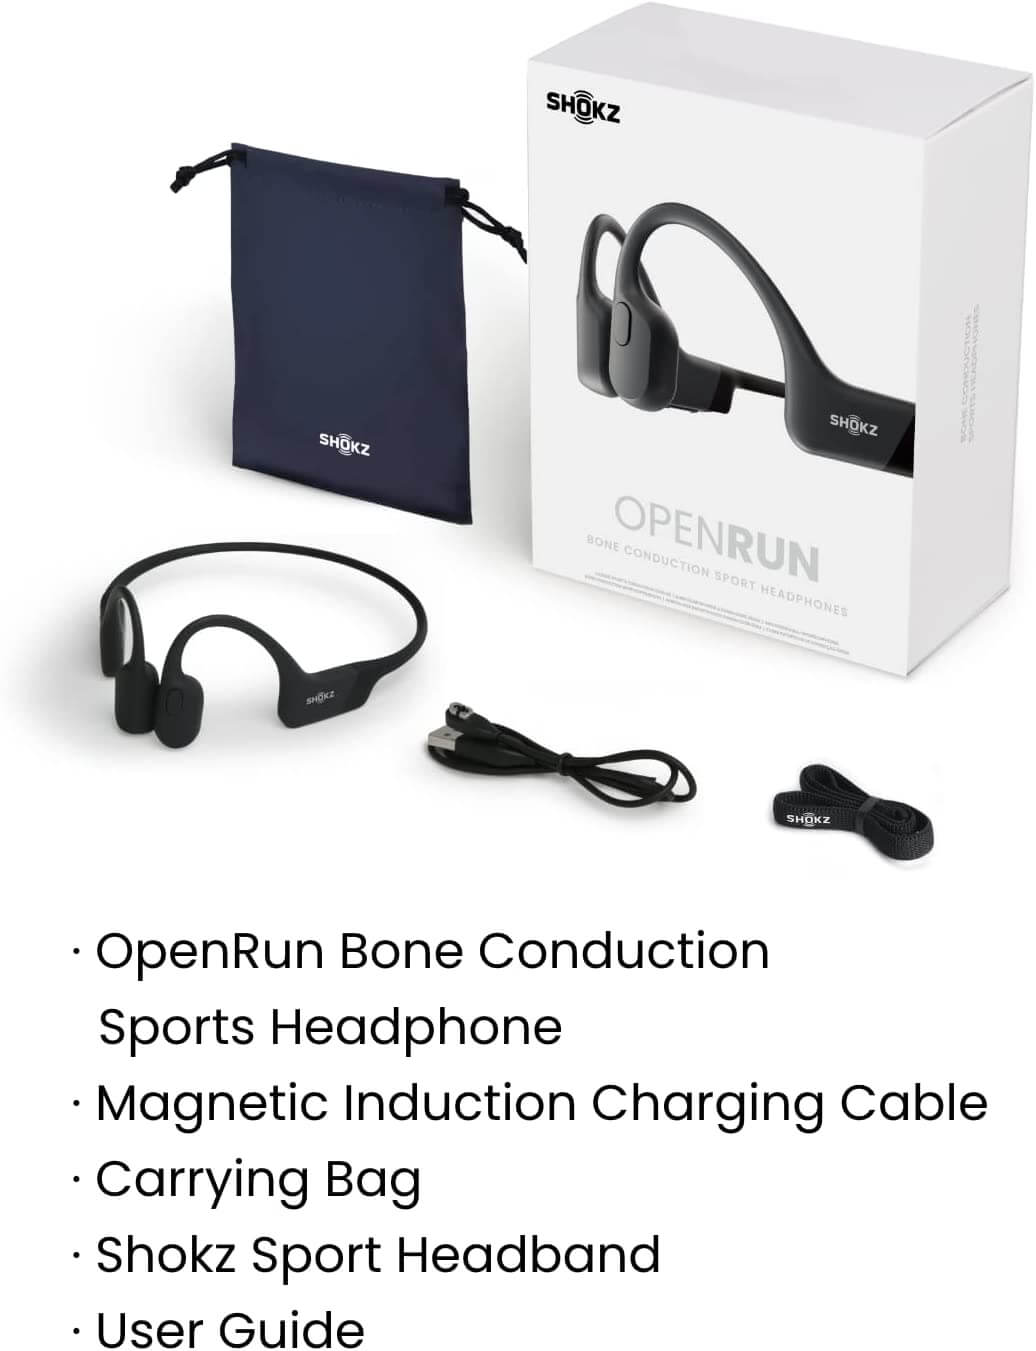 shokz openrun - what is in the box; openrun headphone, magnetic, charging cable, carrying bag, user guide and shokz headband